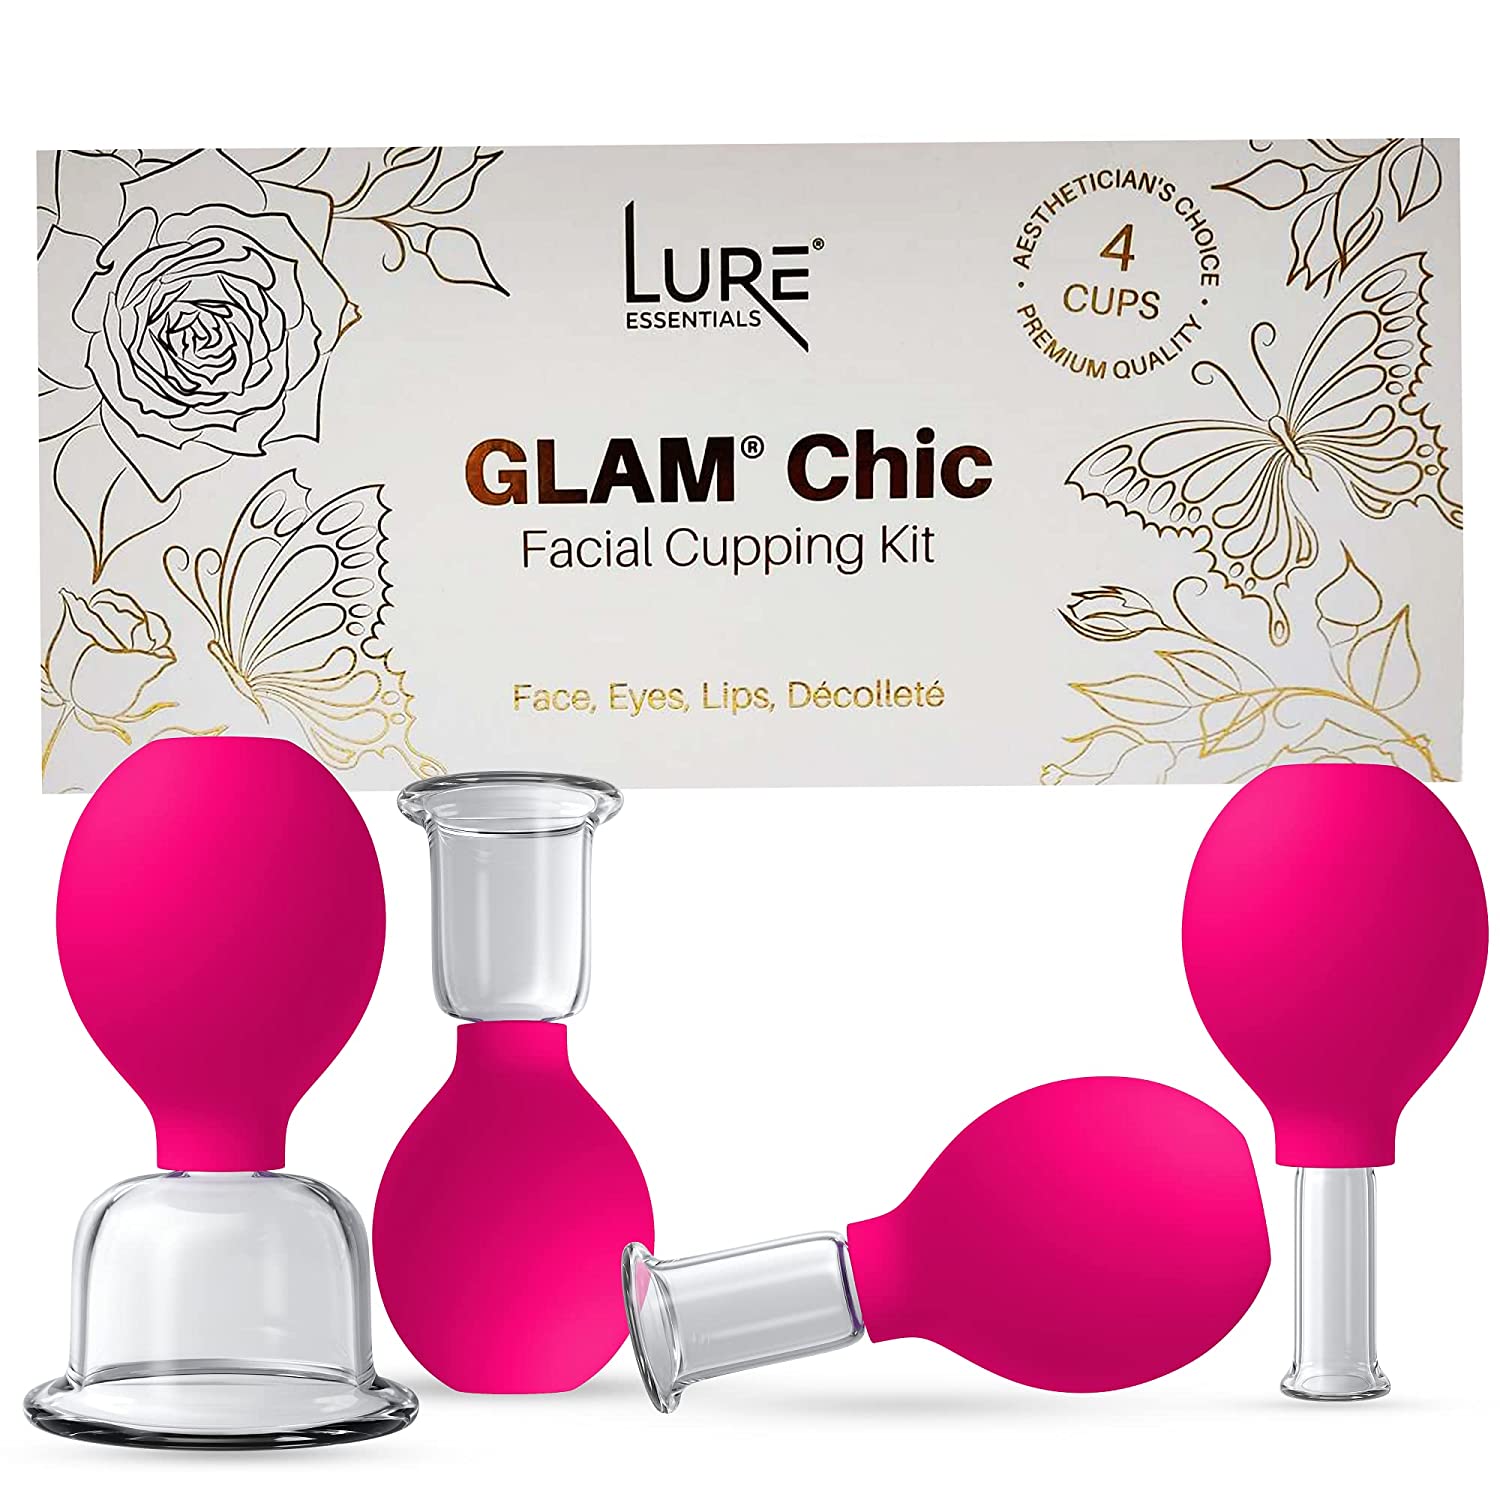 Cupping Sets - Lure Essentials